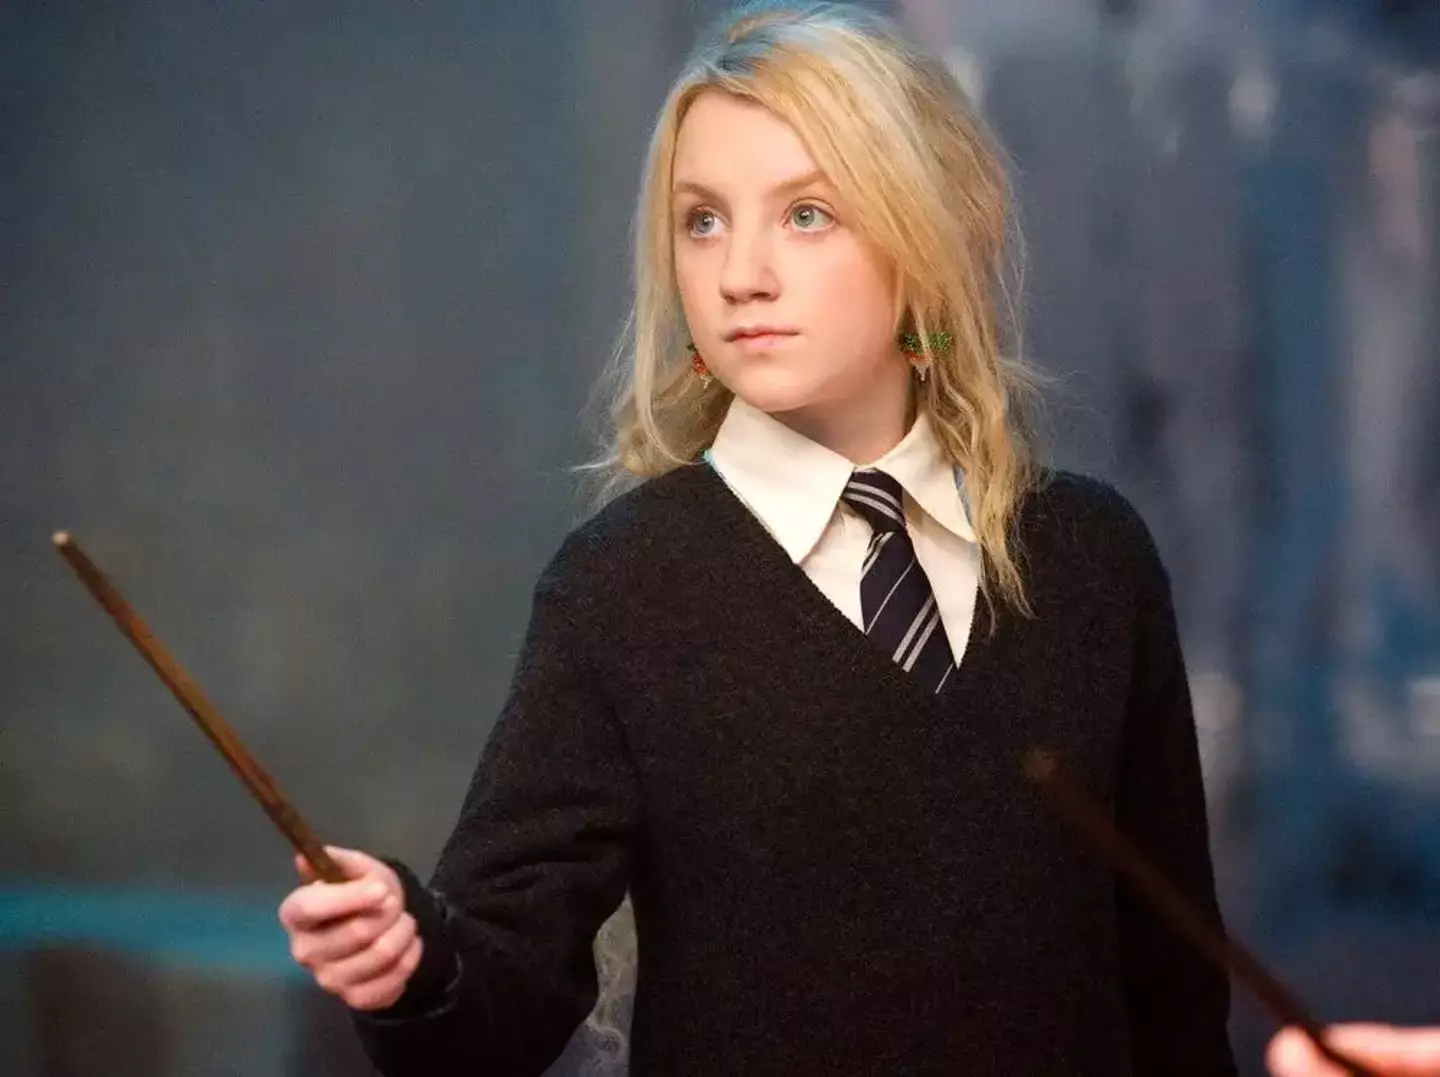 Evanna Lynch found love on the set of the fifth Harry Potter film.